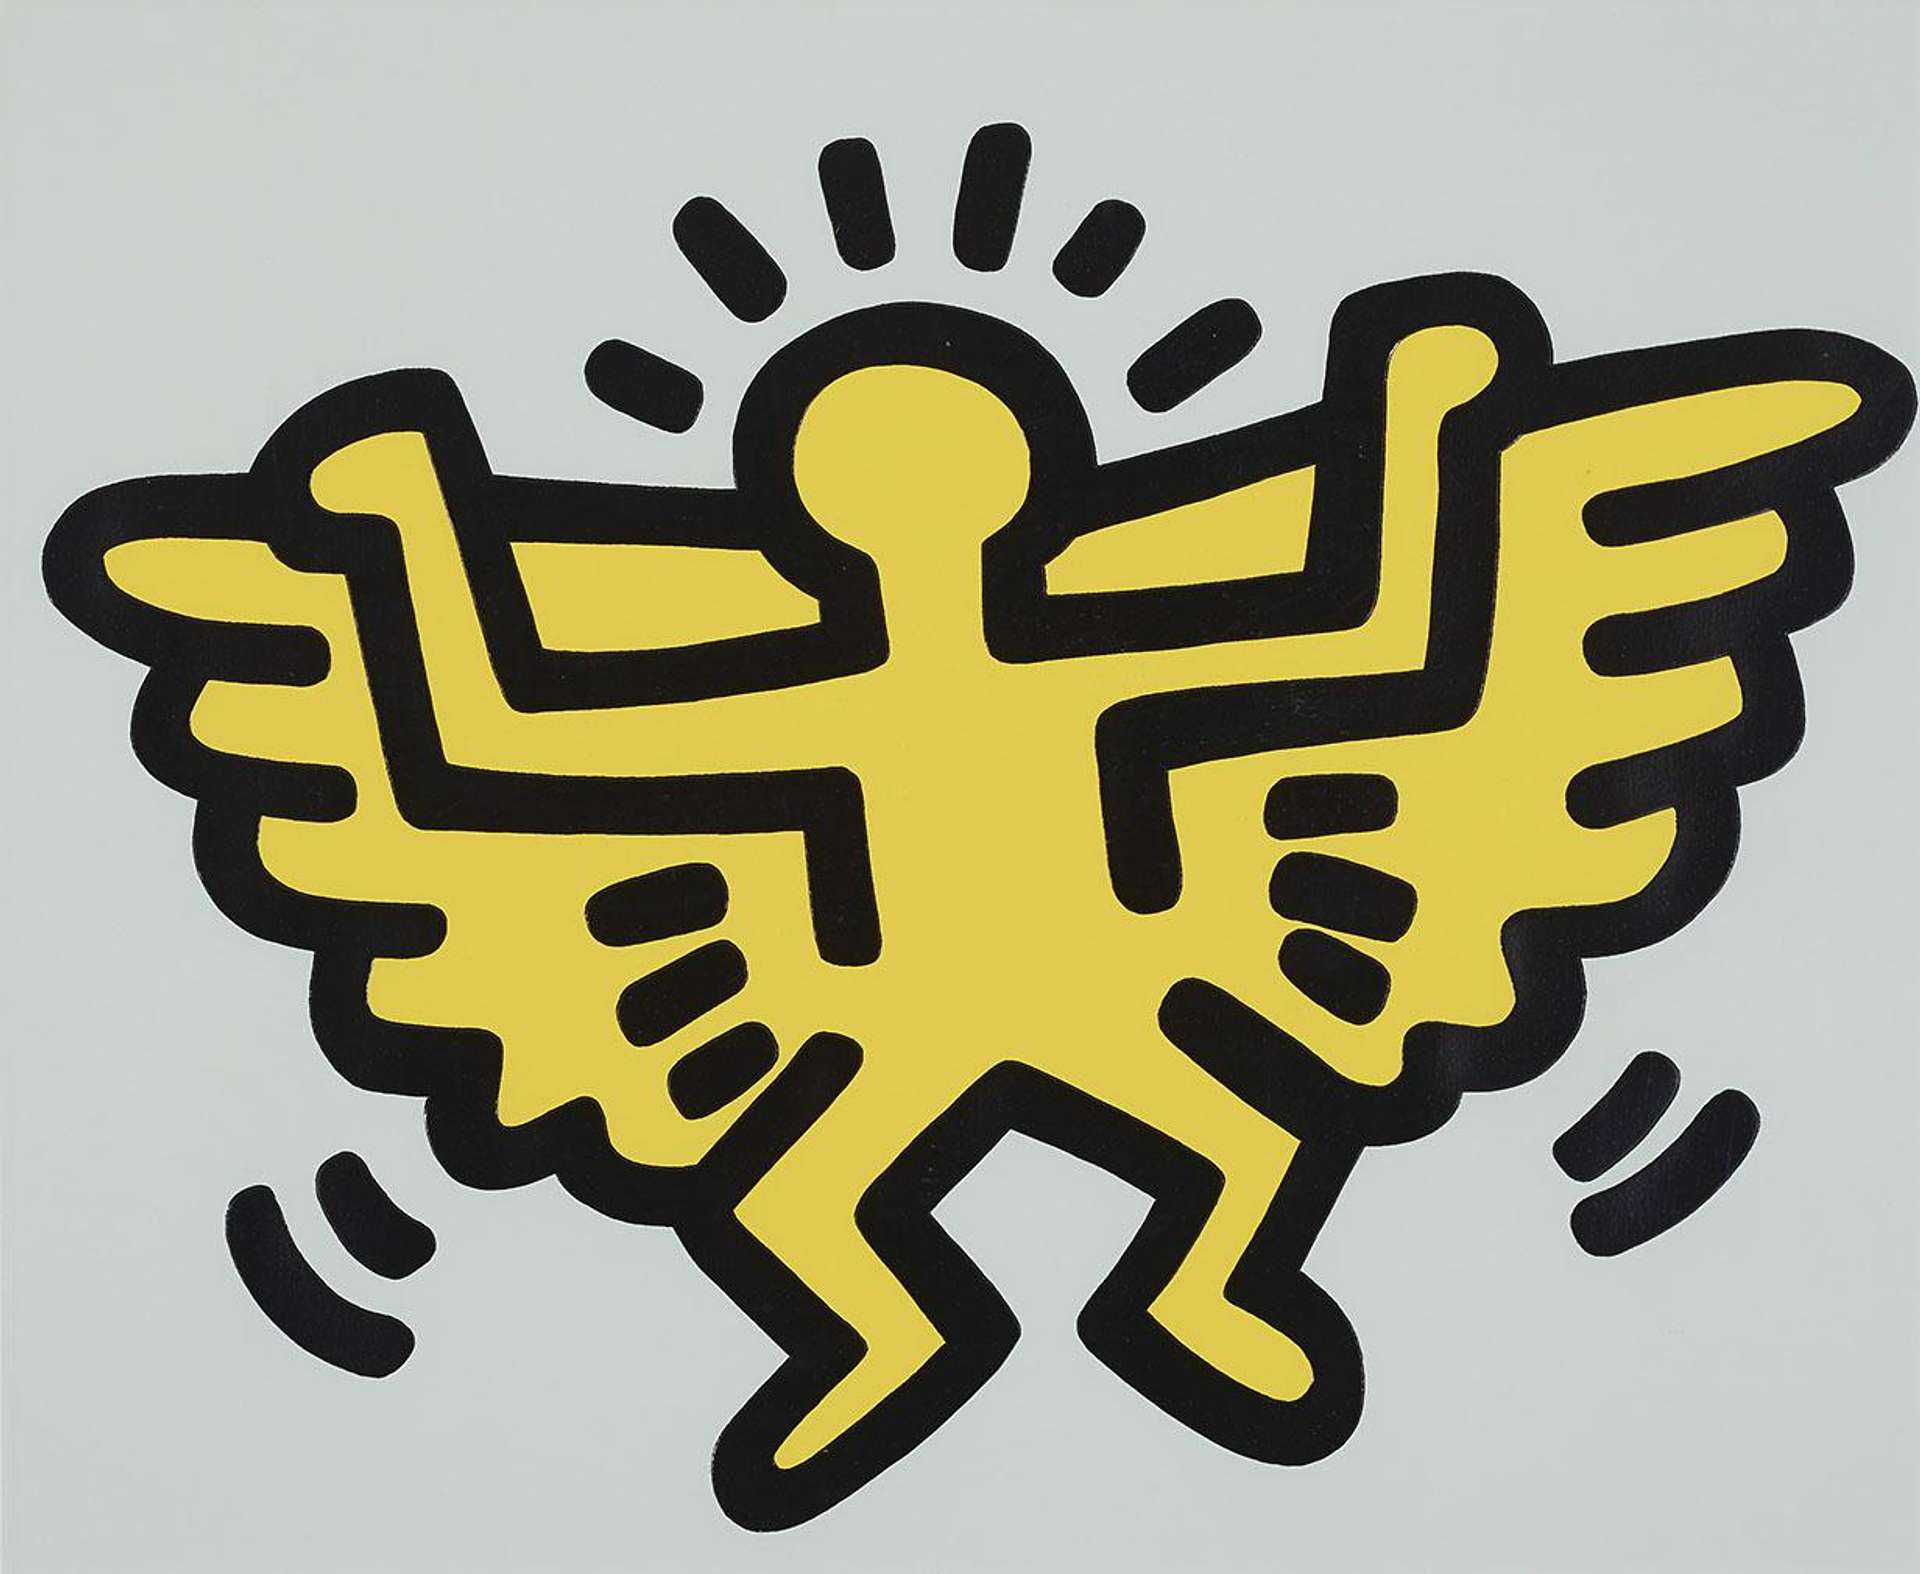 Keith Haring’s Angel. A Pop Art screenprint of a yellow angel character against a grey background.